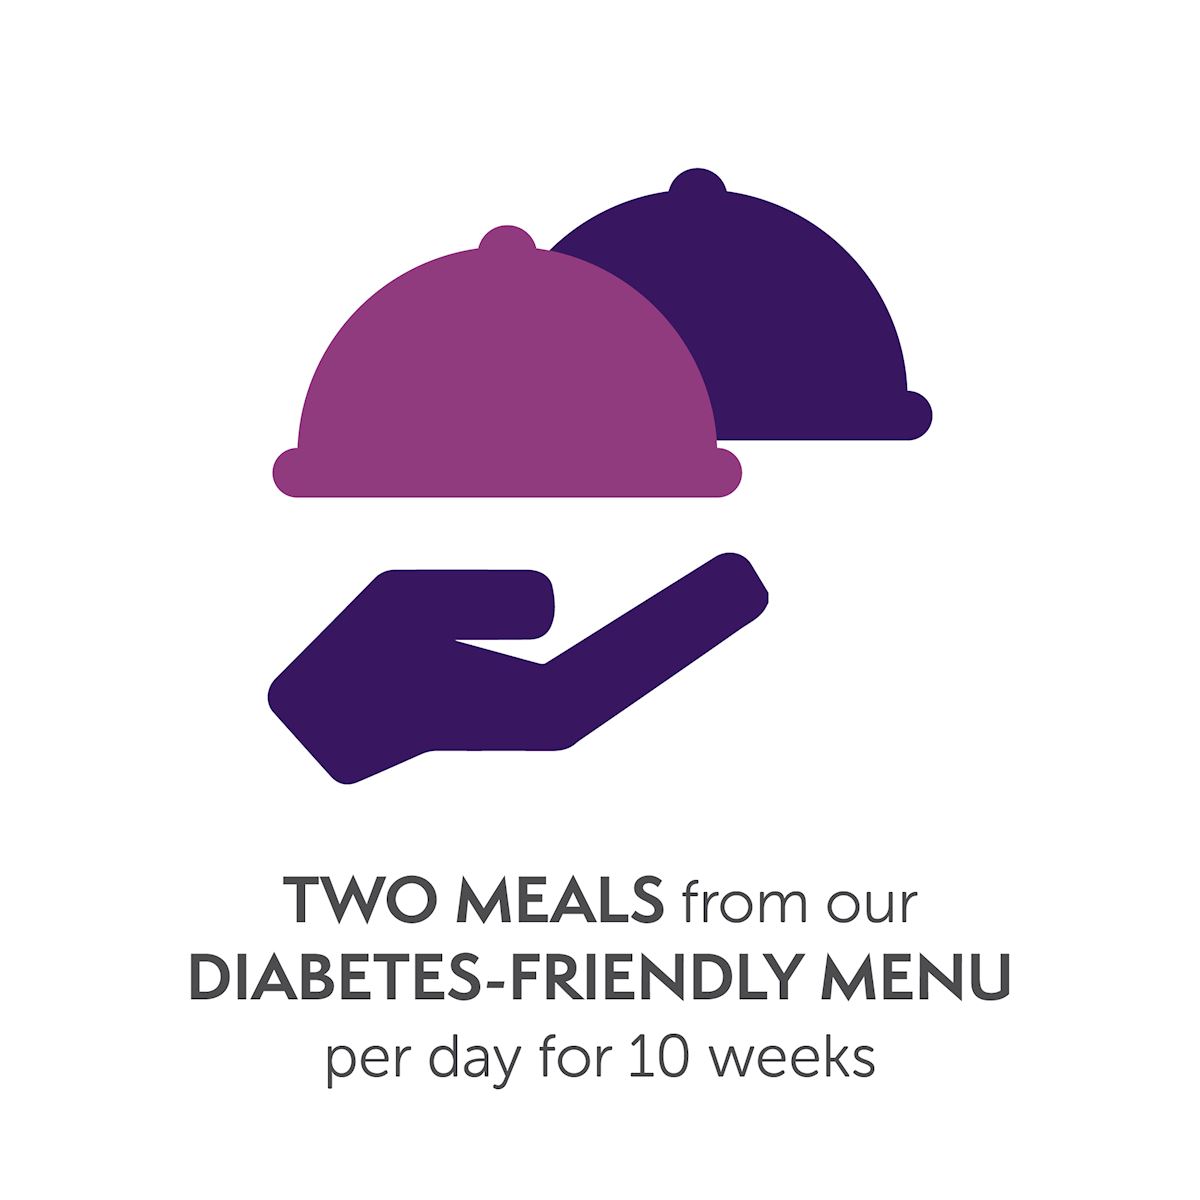 Two meals from our diabetes-friendly menu per day for 10 weeks